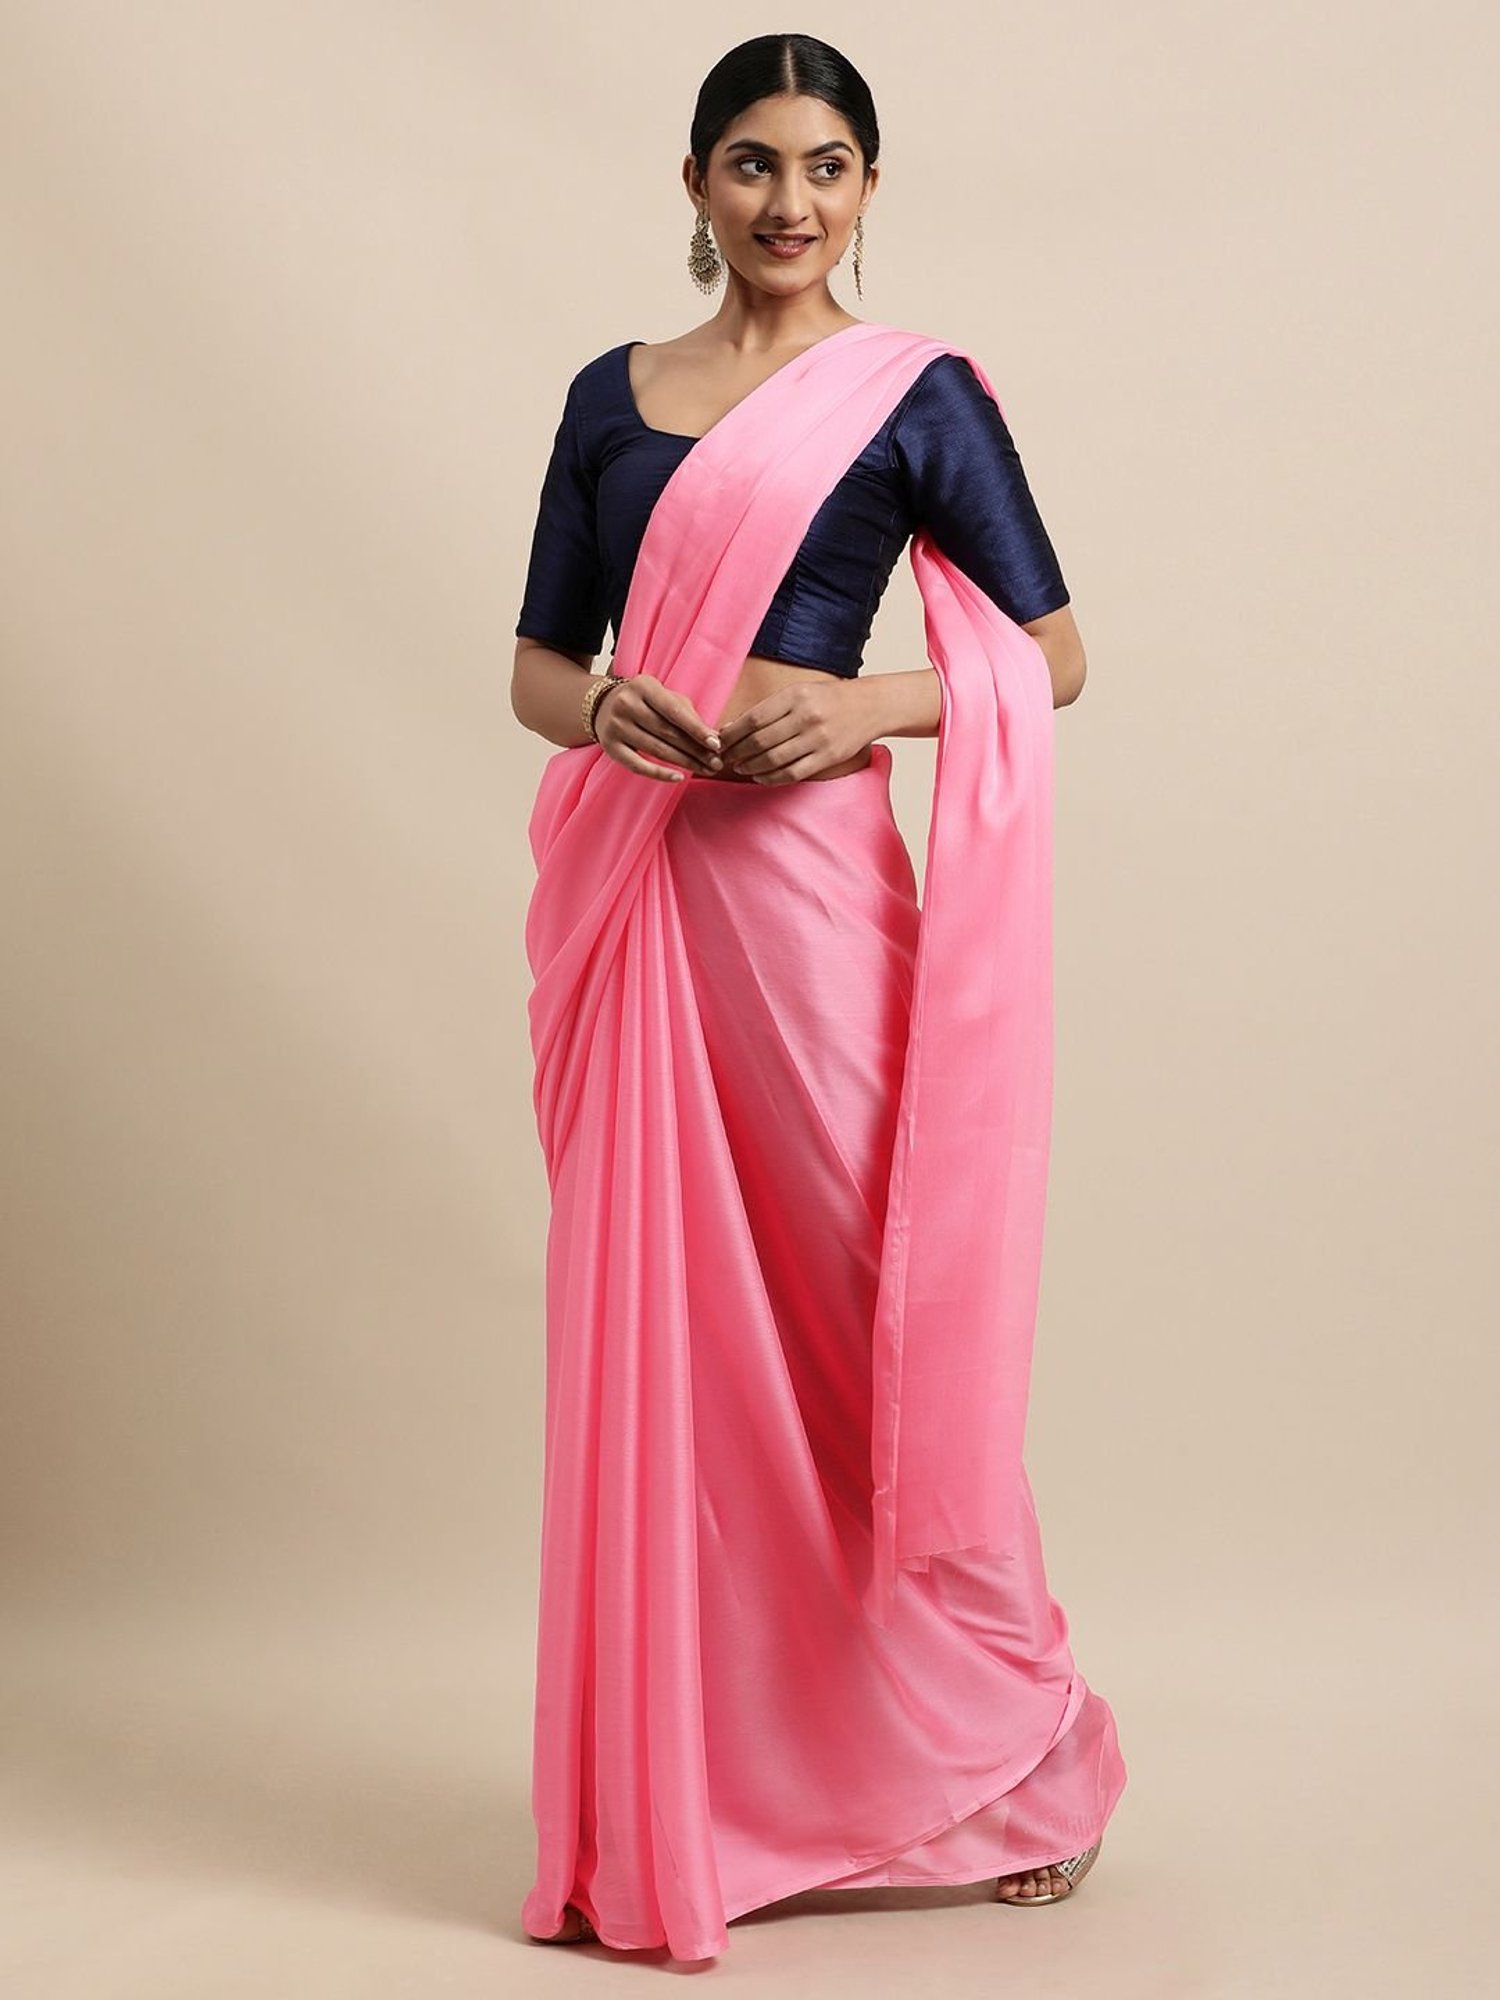 Buy Pink Saree With Black Sequin Blouse. 1 Minute Saree Designer Made to  Order Custom Blouse With Fall and Petticoat. Indian Sari Online in India -  Etsy